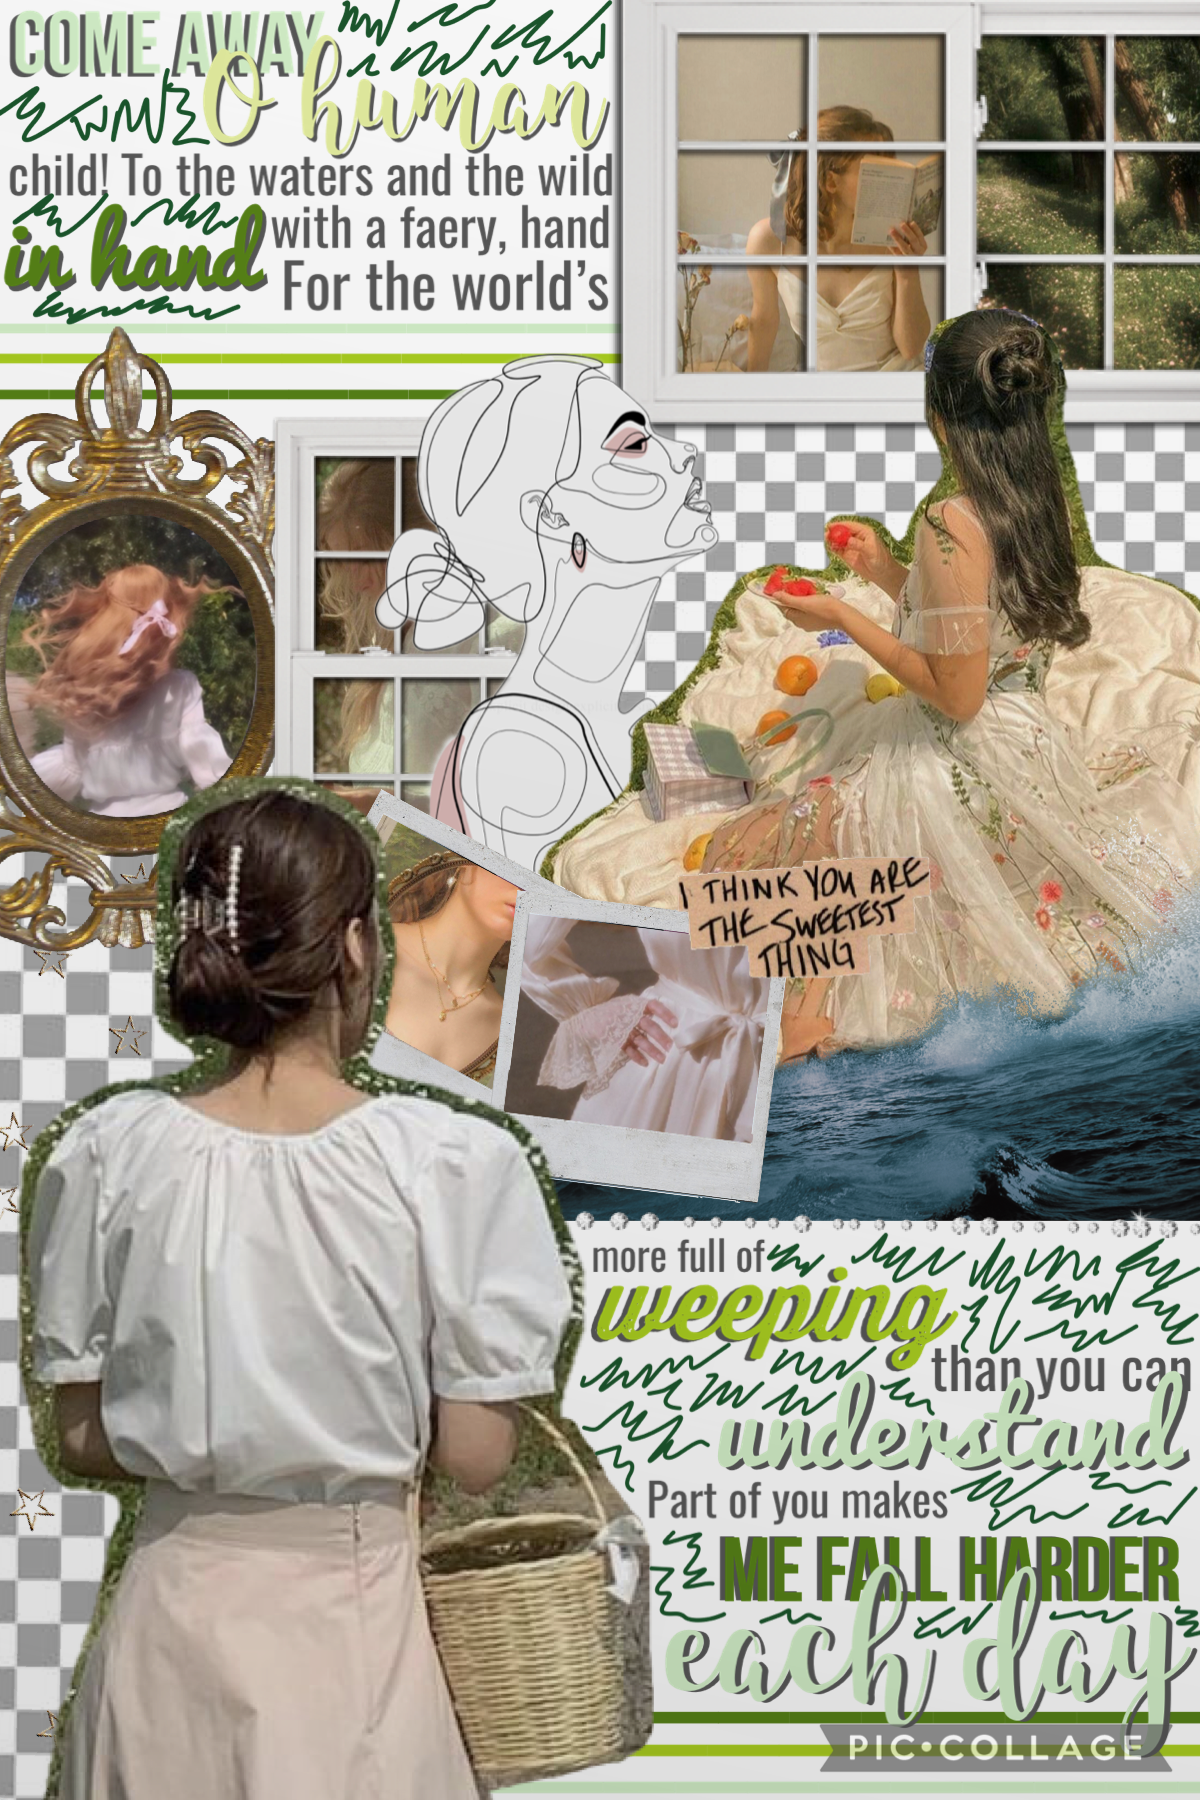  🎀17/3/21🎀
I tried to do an ethereal theme, but it turned out to be cottagecore 😅 Anyone notice that PC is going downhill? I’ve lost a bit of interest in making collages, but idk. Lmk if you feel the same. QOTD: What are some emojis that you will never us